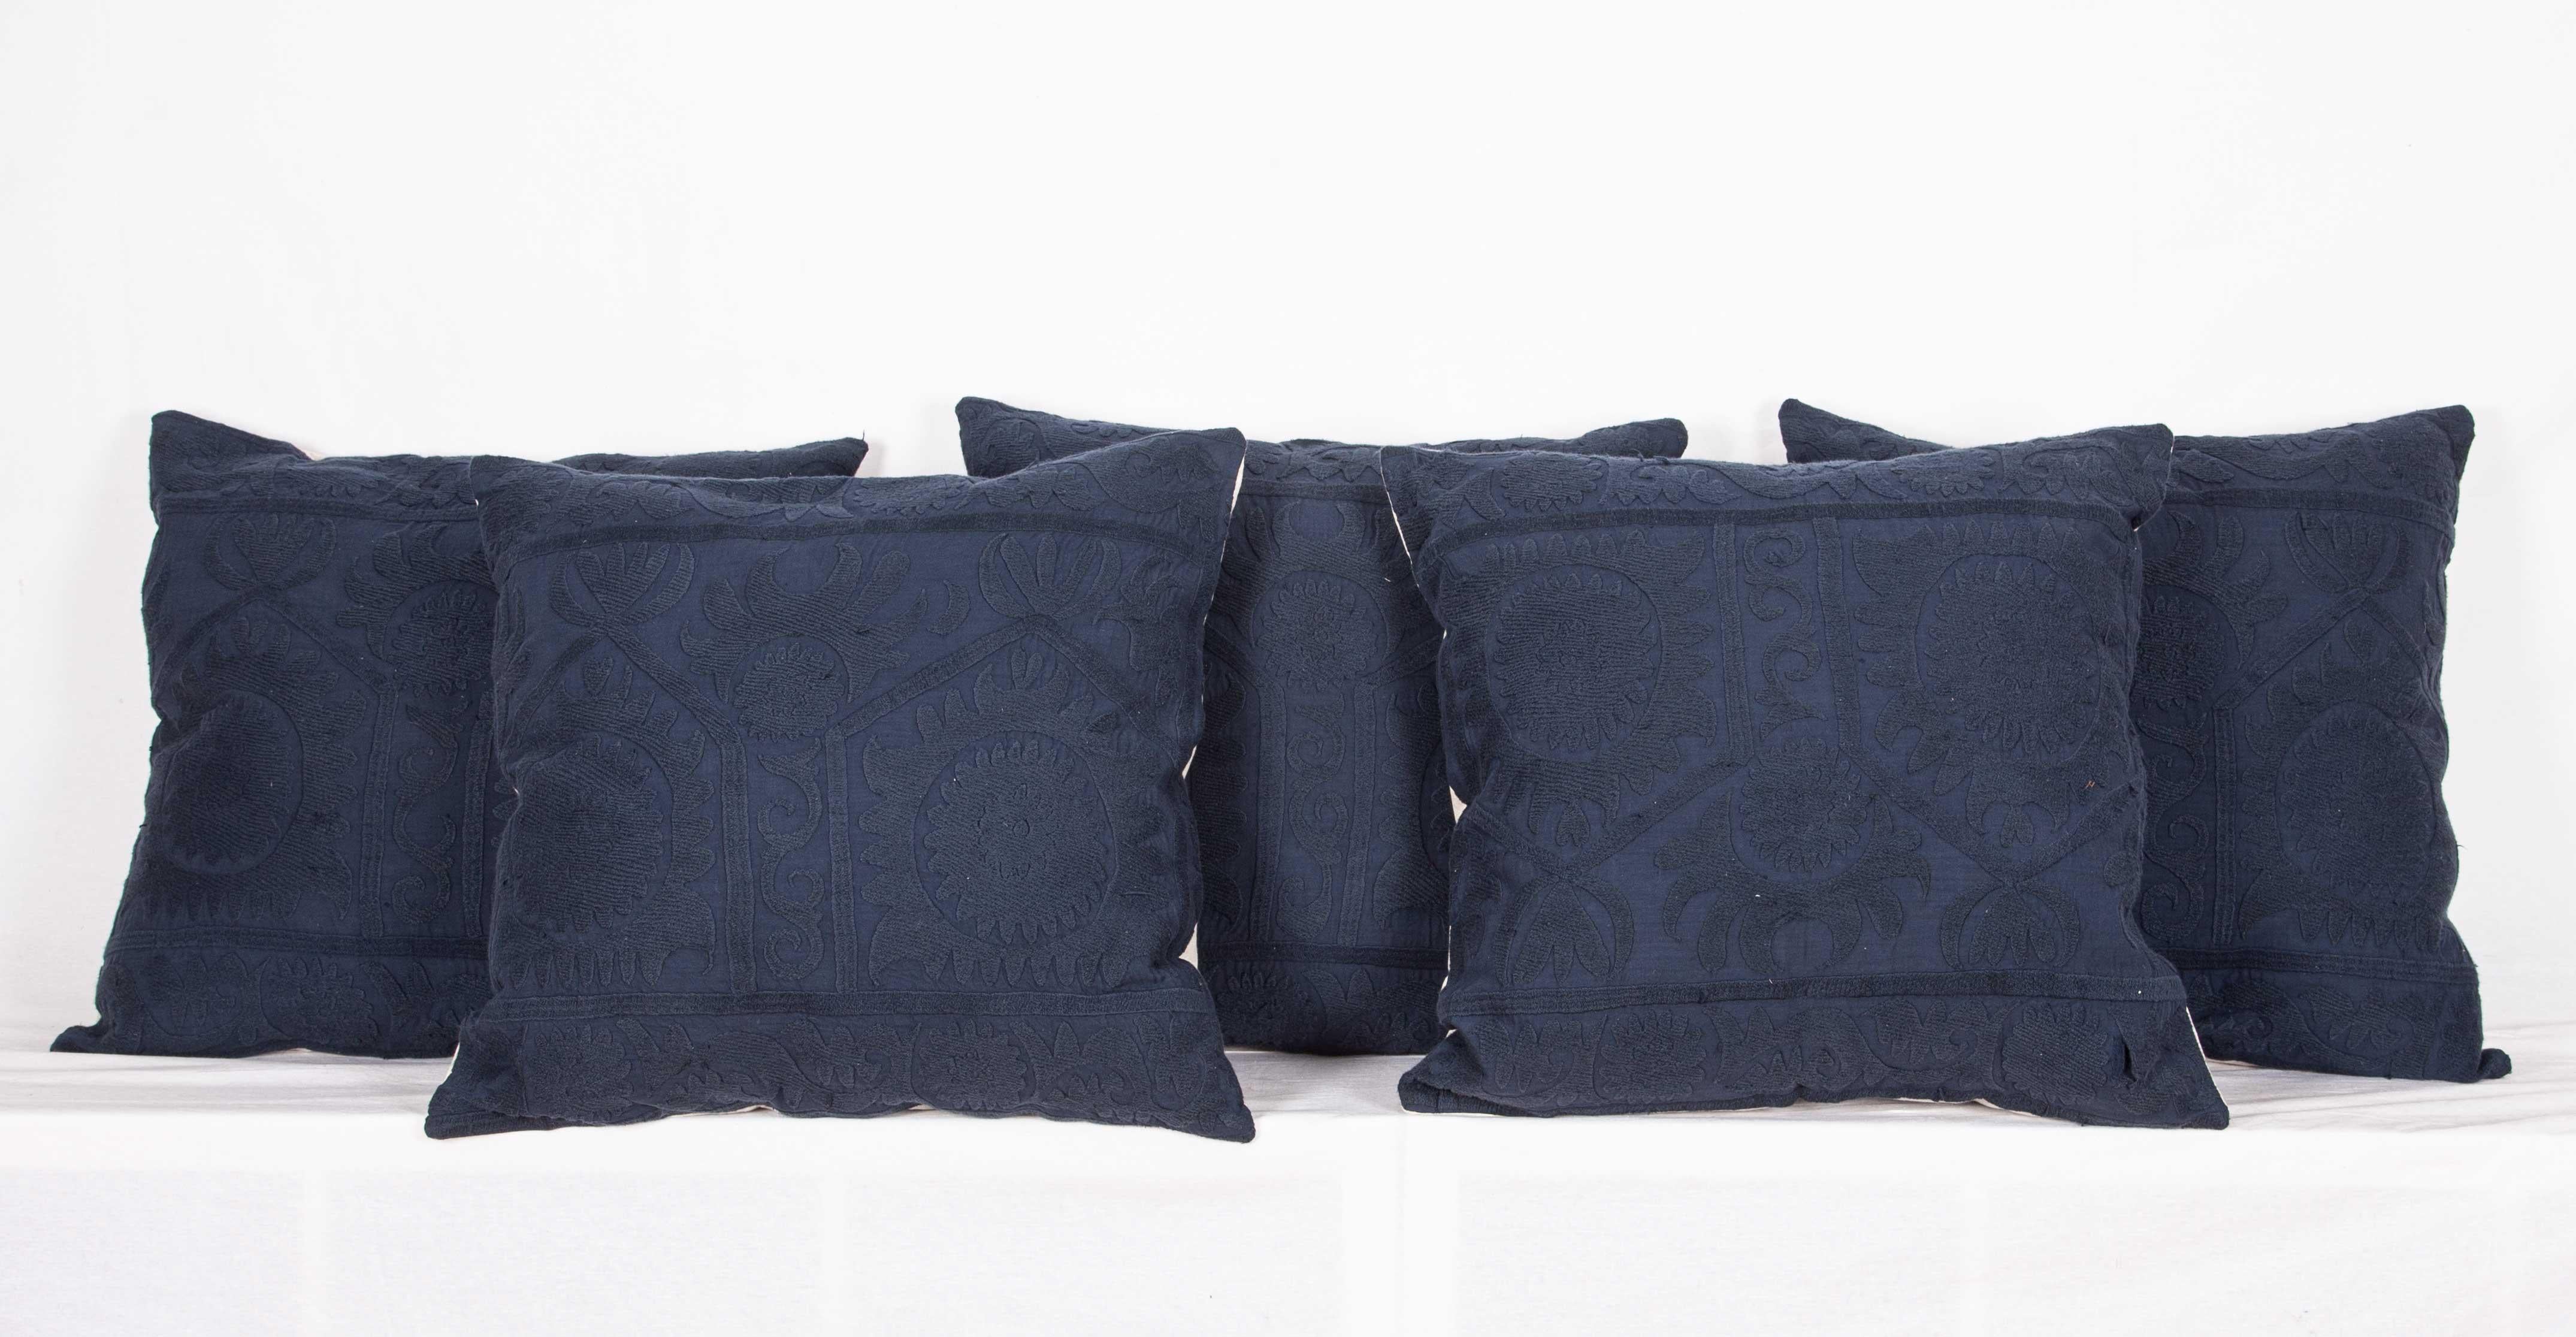 These Suzani pillow cases fashioned from vintage Suzanis that are overdyed. The results are here, a minimalist look with some texture.
Linen in the back
Zipper closure
Dry cleaning is recommended
Measures: 55 x 57 cm/21.65 x 22.44 in
56 x 58 cm/